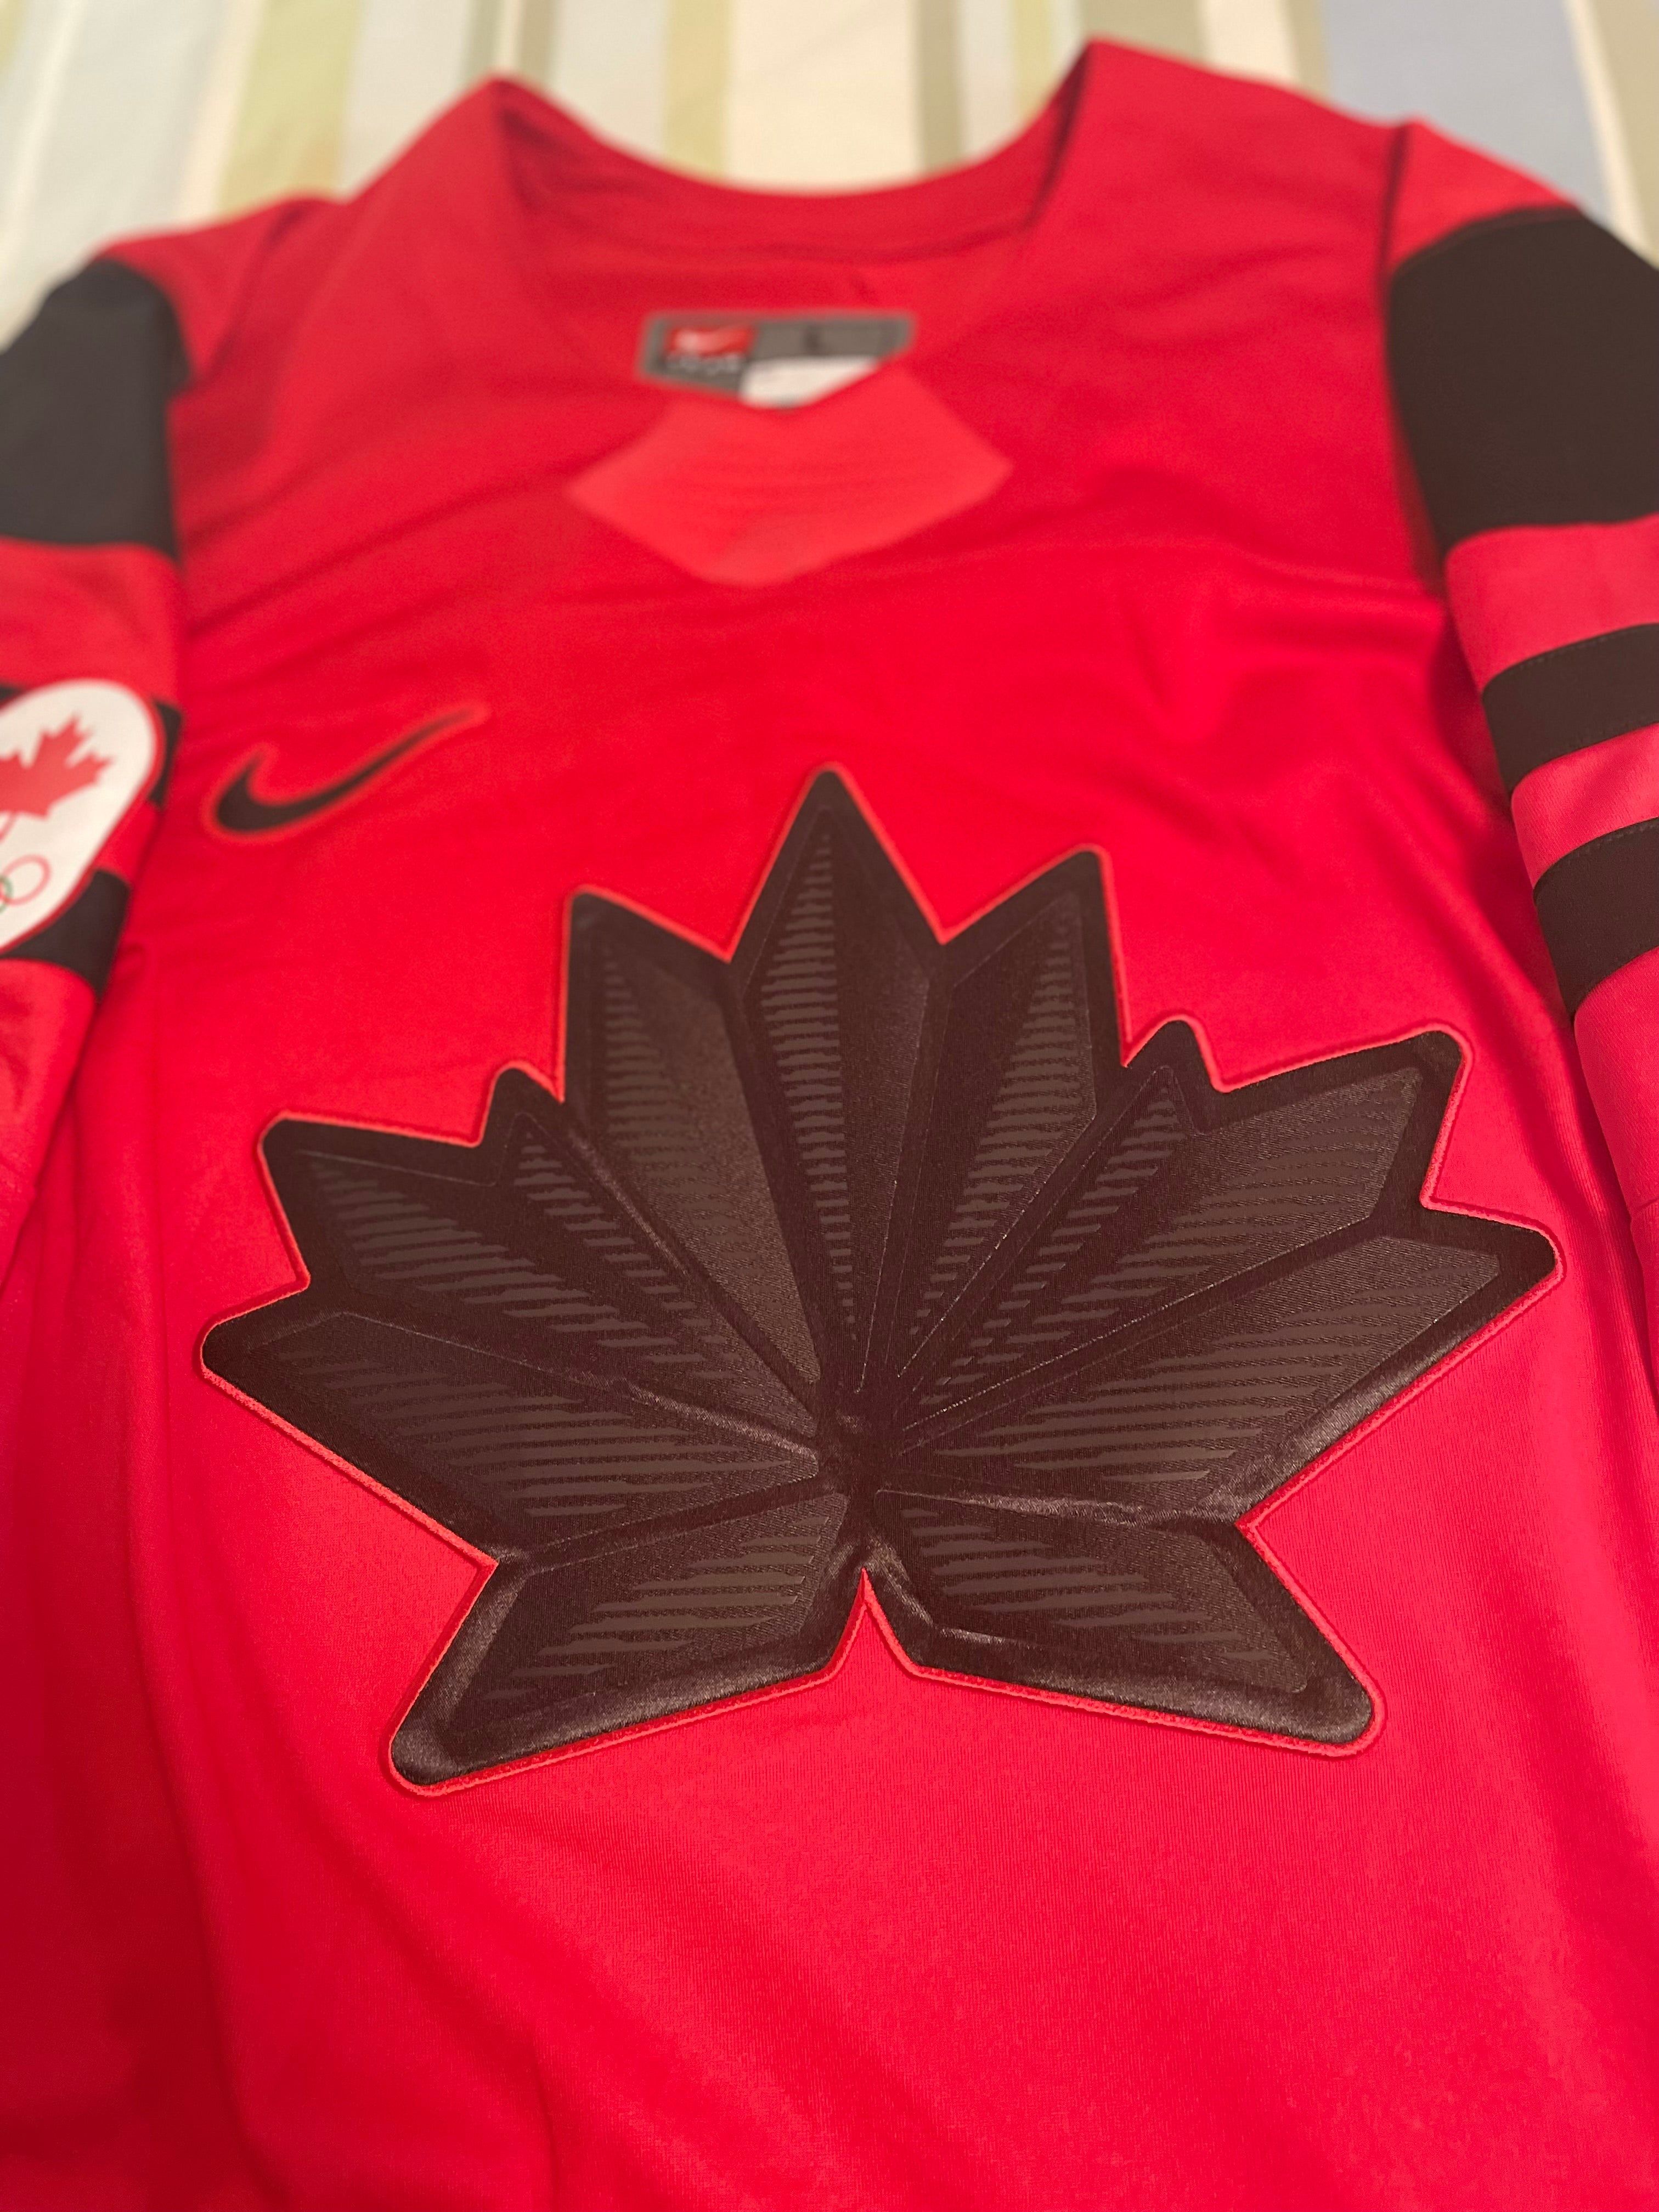 Team Canada 2022 Olympic Nike Jersey Red - NEW w/ TAGS